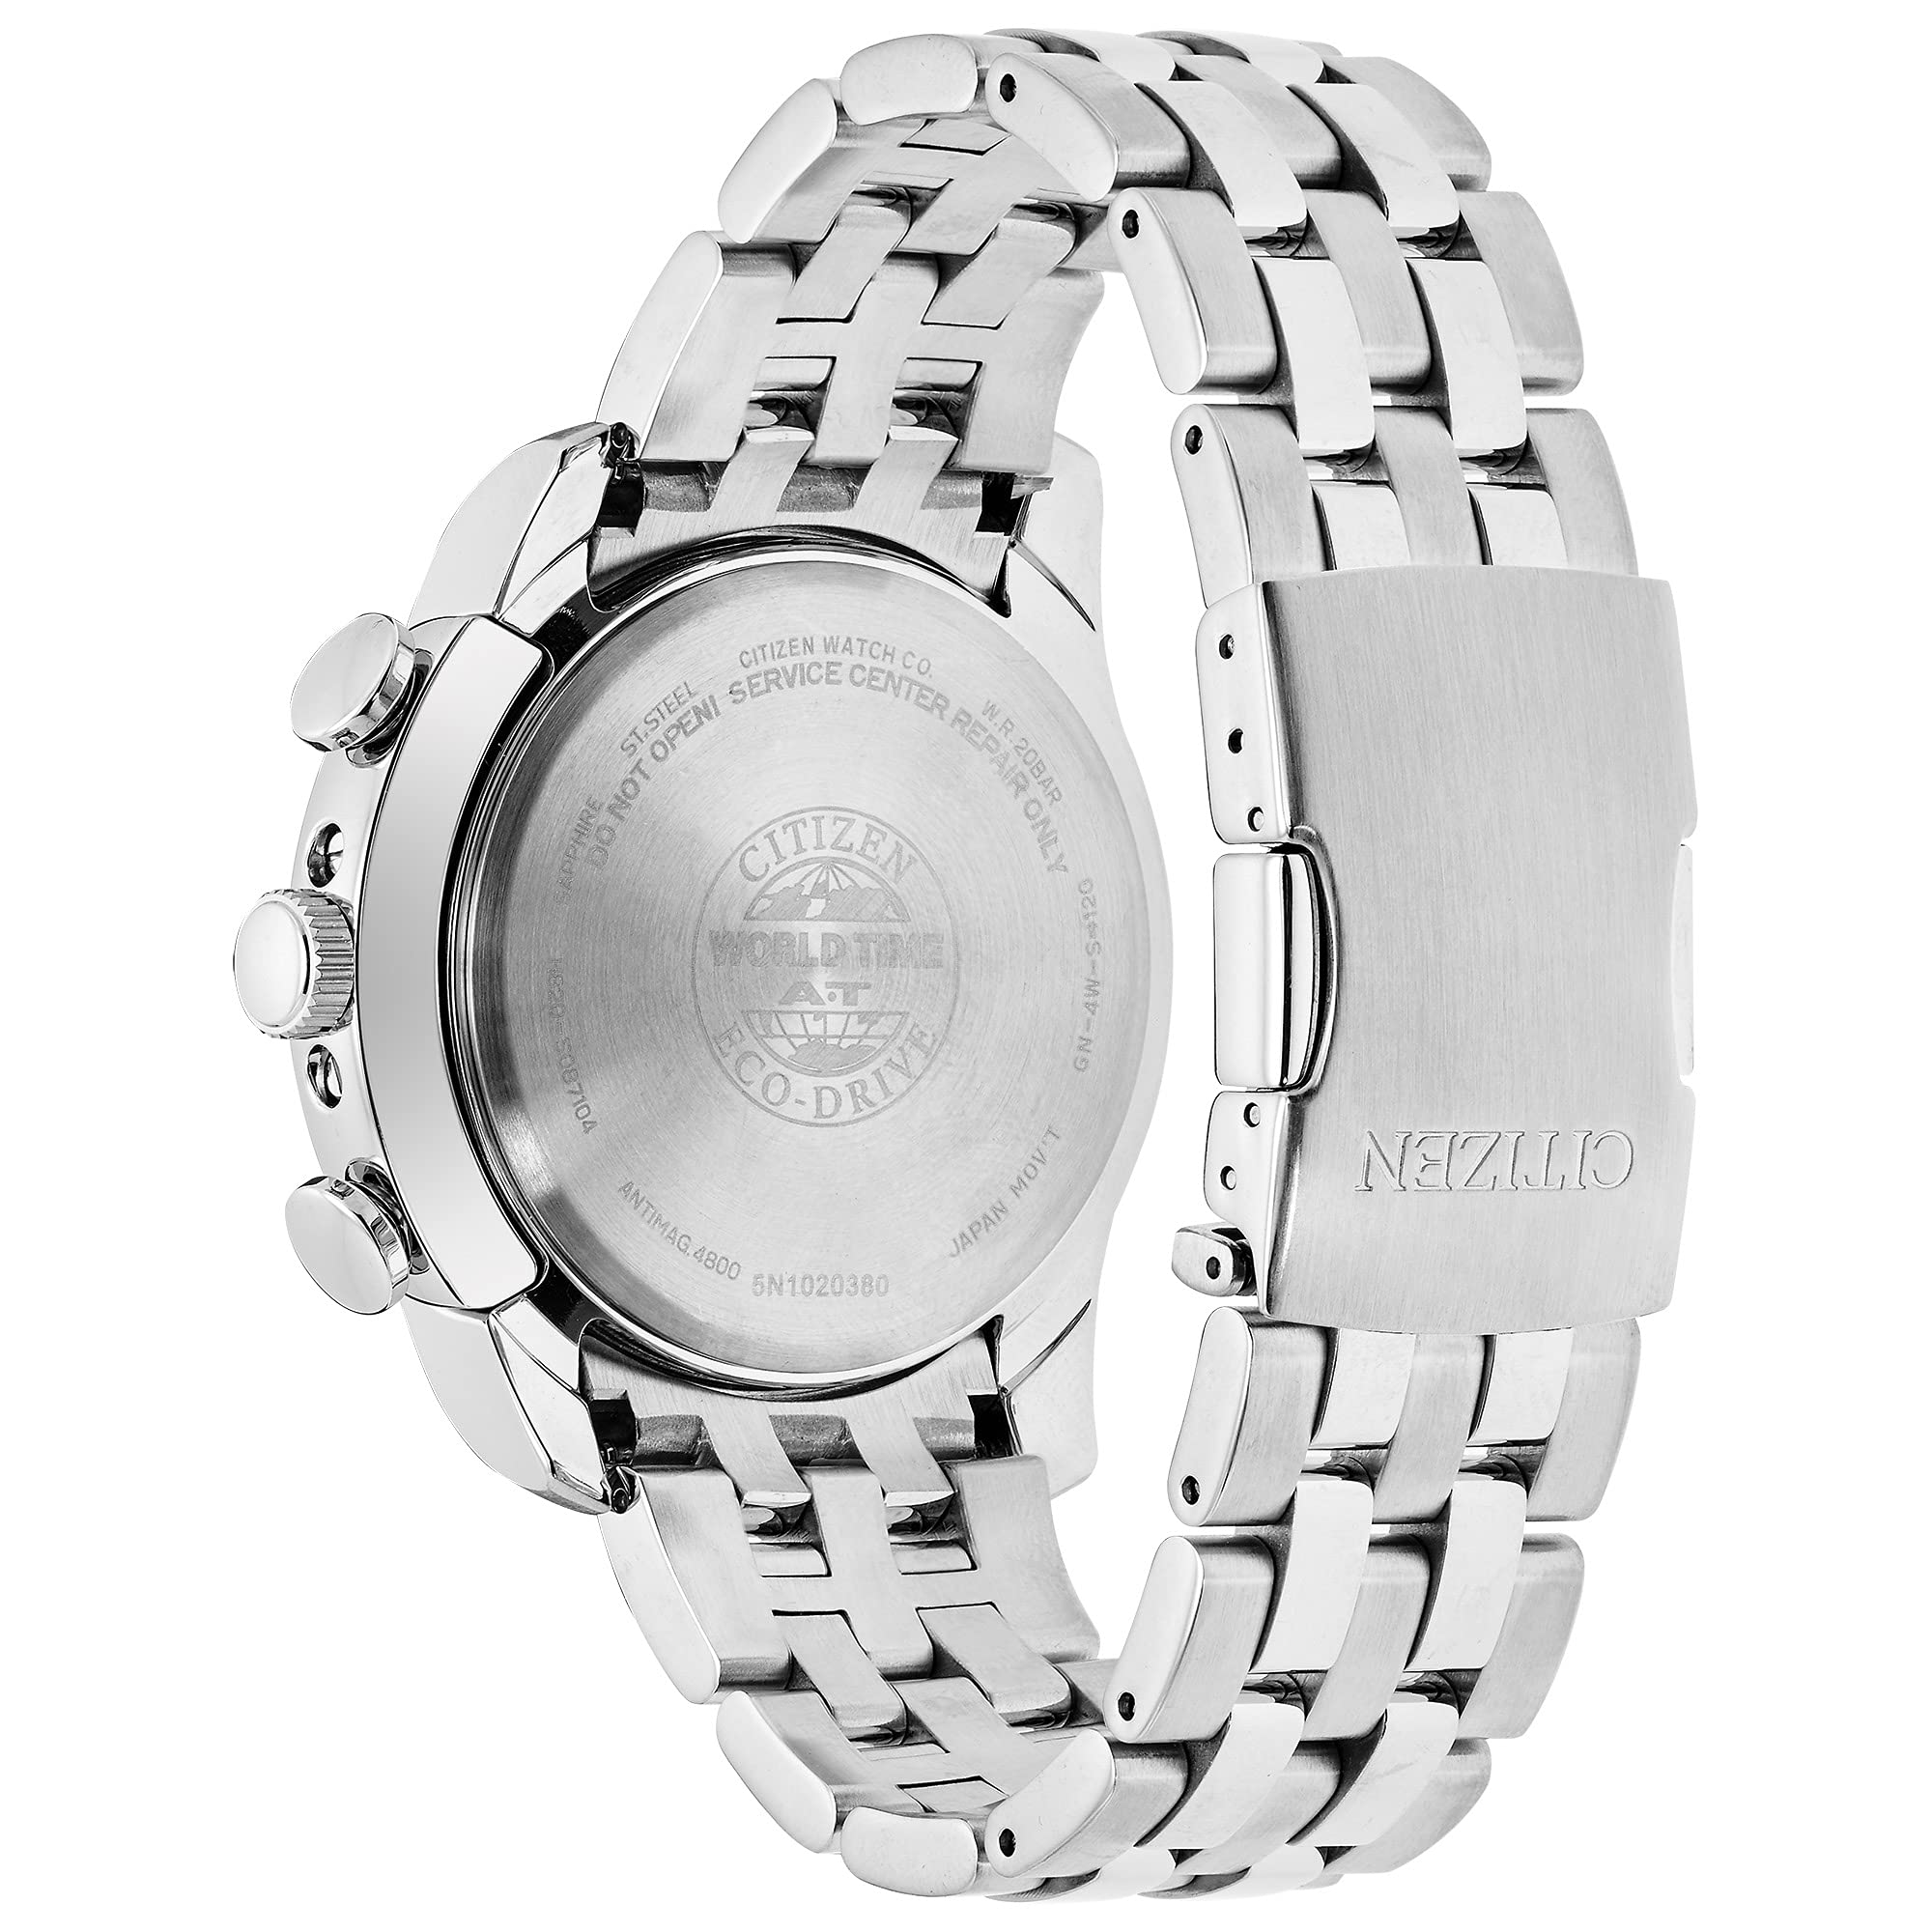 Citizen Eco-Drive World Time A-T Mens Watch, Stainless Steel, Technology, Silver-Tone (Model: AT9010-52E)